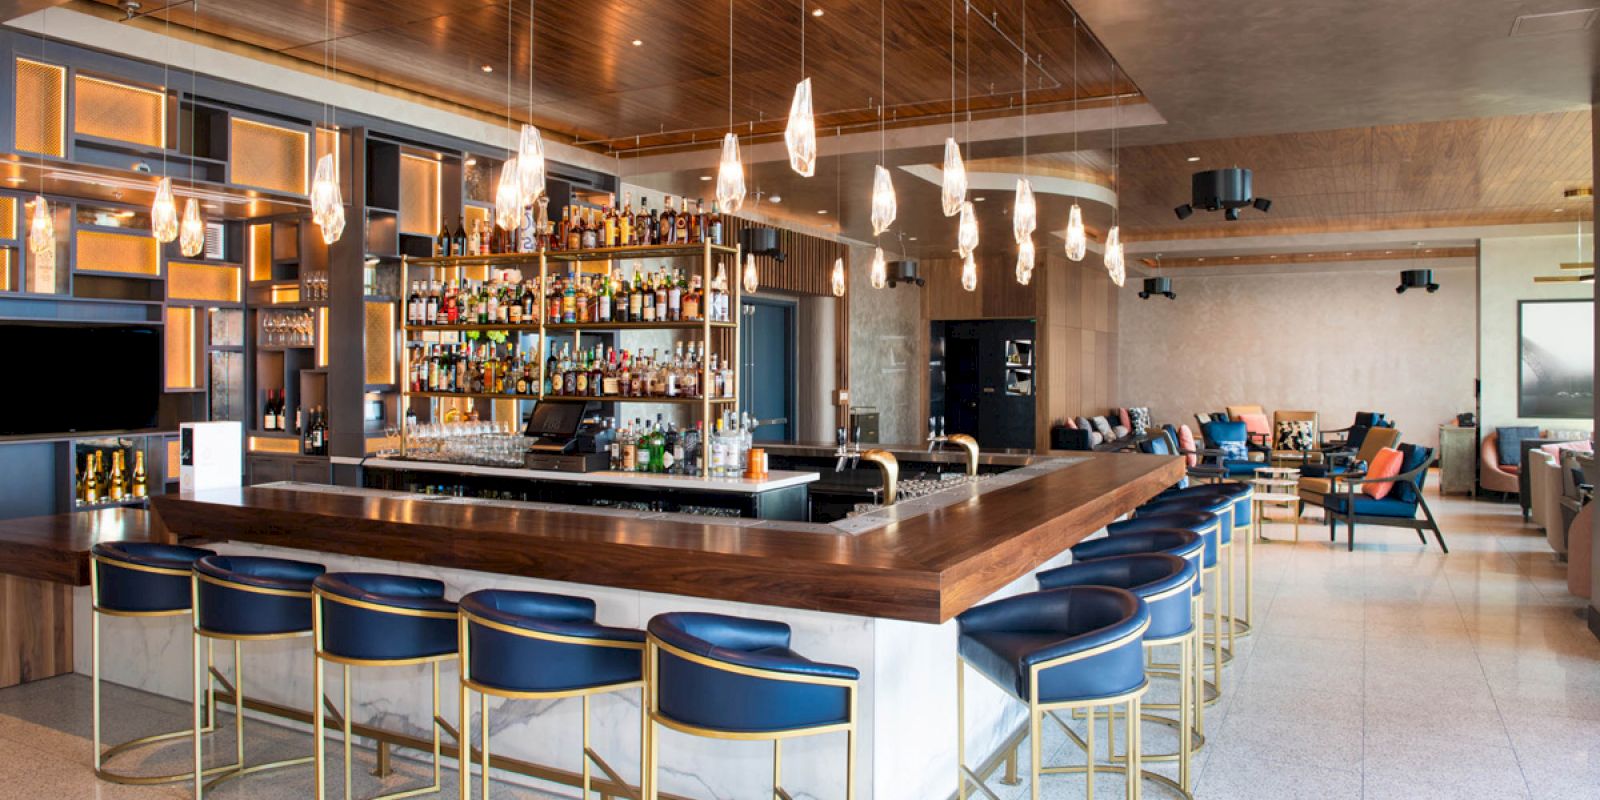 A modern bar with blue cushioned stools, a well-stocked liquor shelf, elegant pendant lights, and a cozy lounge area in the background.